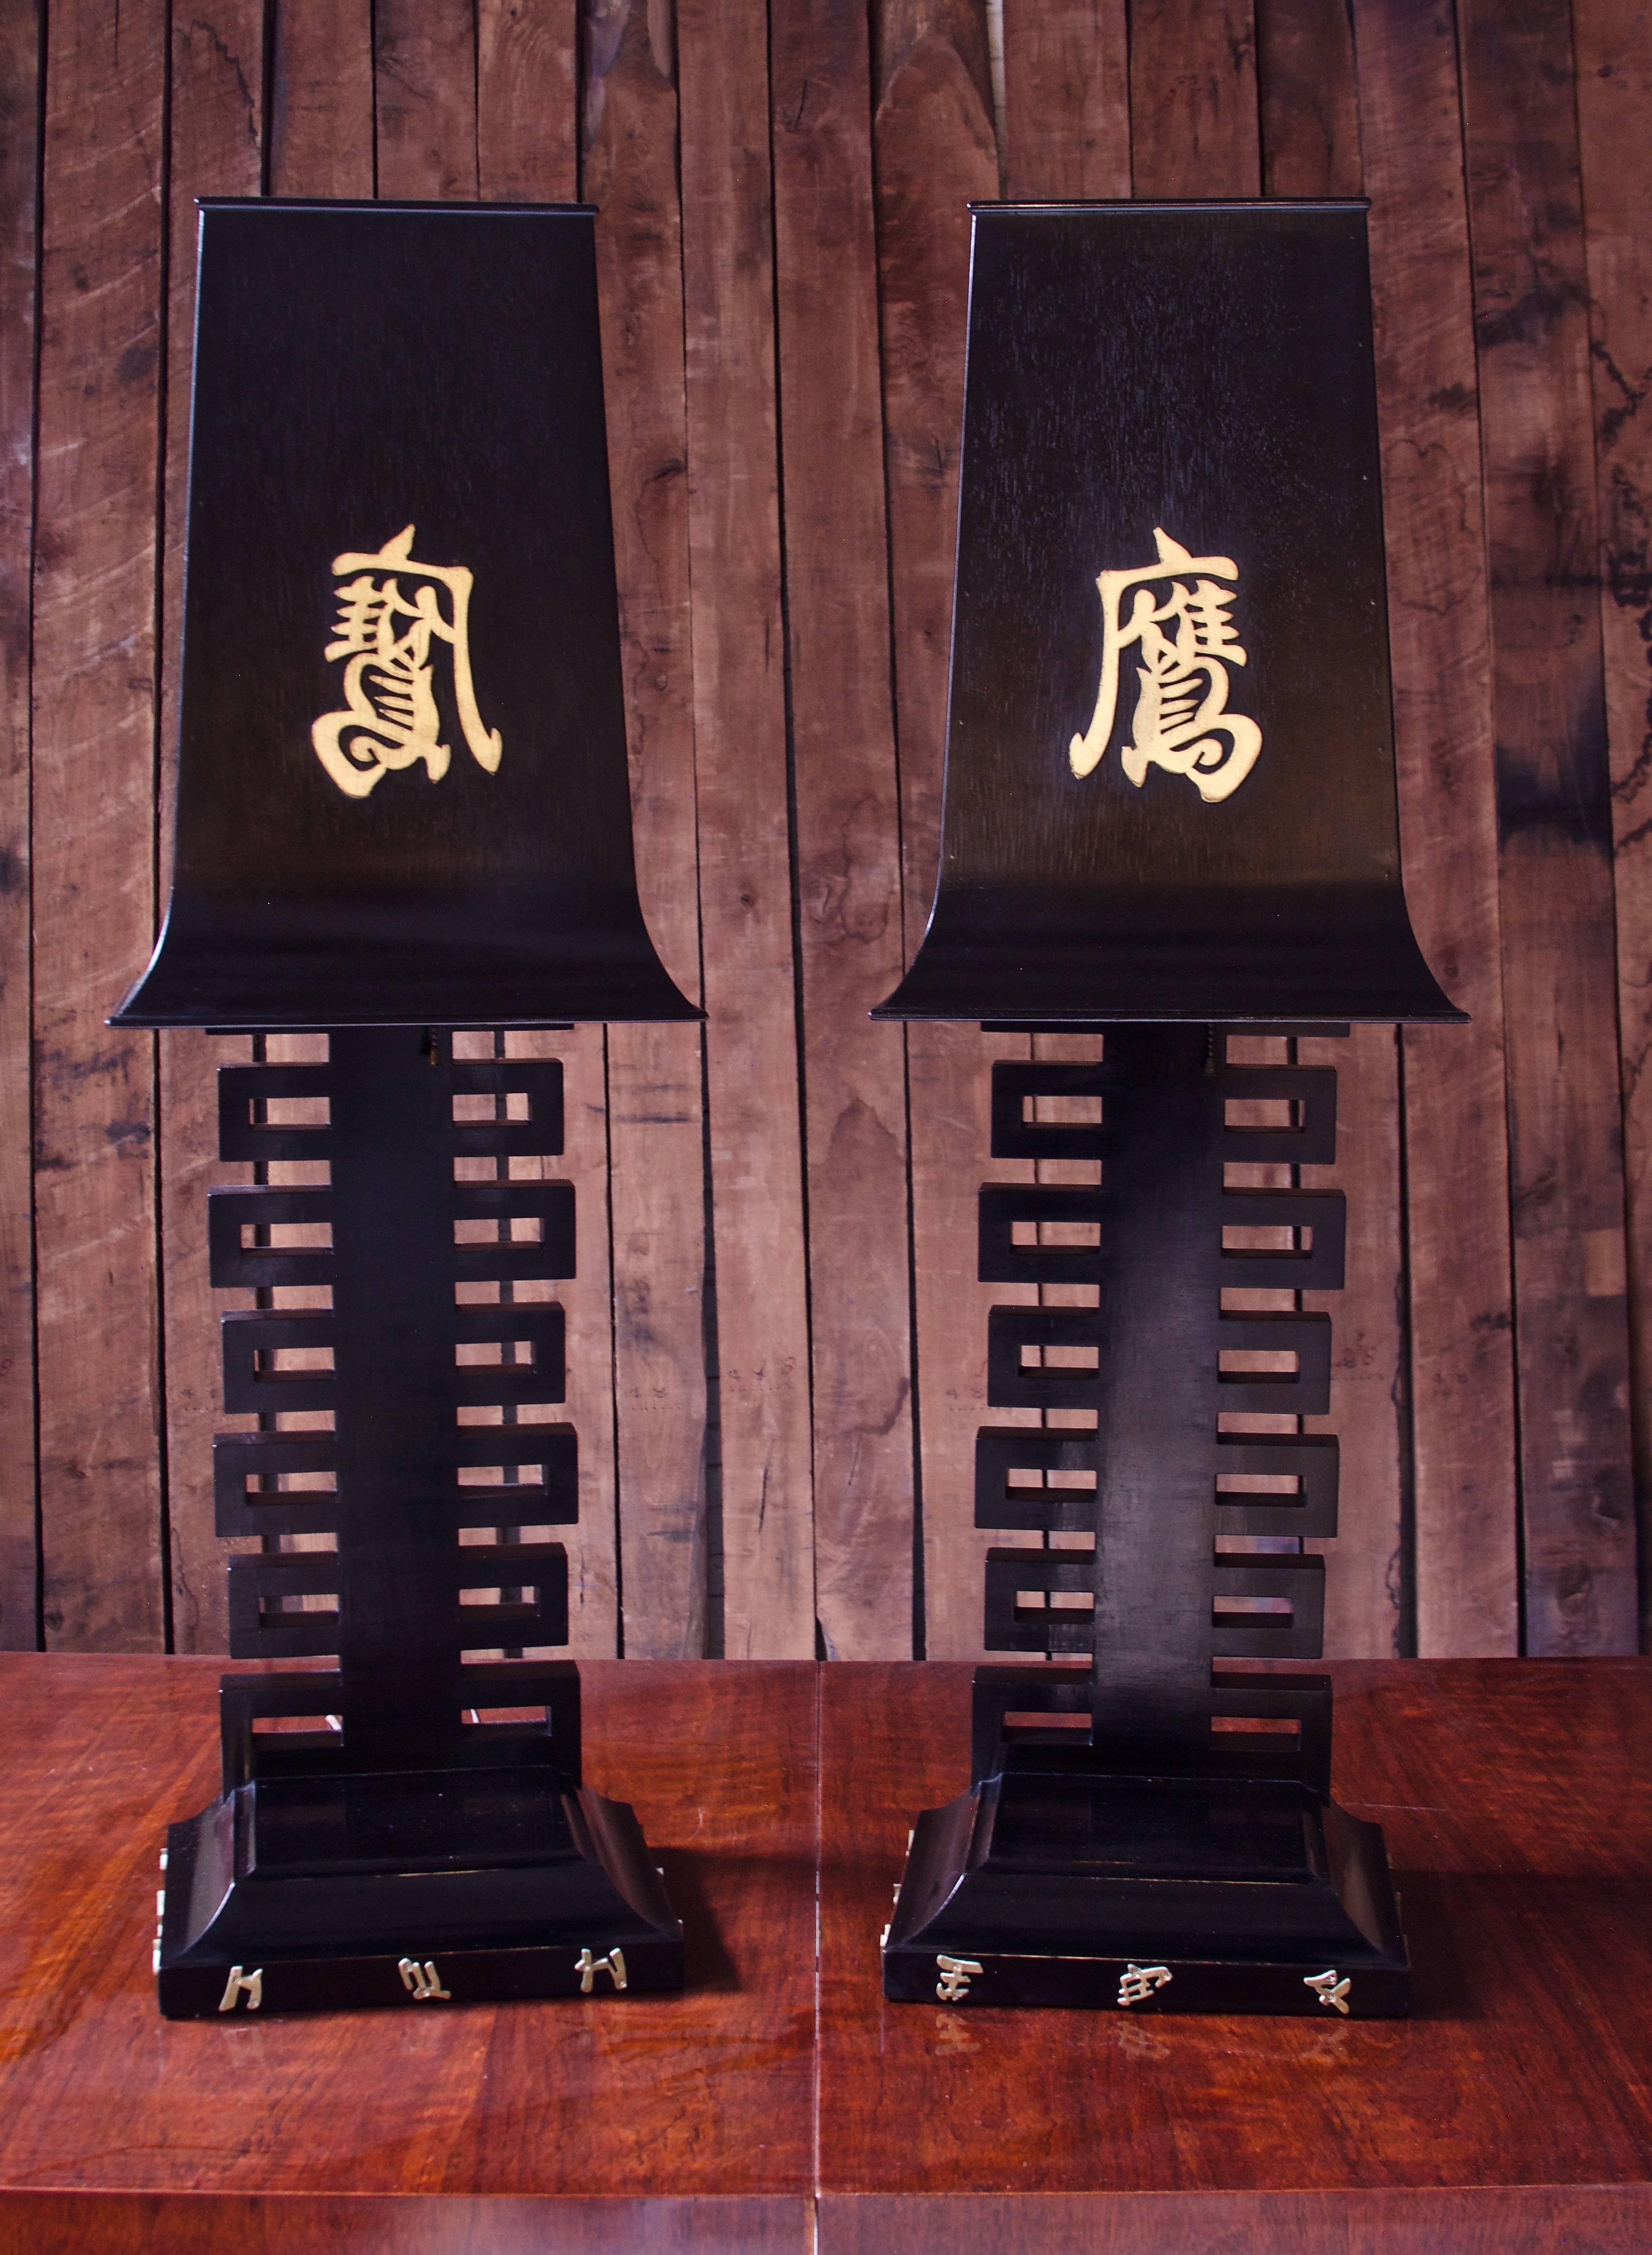 Sizeable pair of handmade table lamps with black lacquered wood bases and shades & brass characters by James Mont, circa 1948. Pagoda or Asian temple motif informs this unique design; excellent craftsmanship apparent in the construction. Delicately